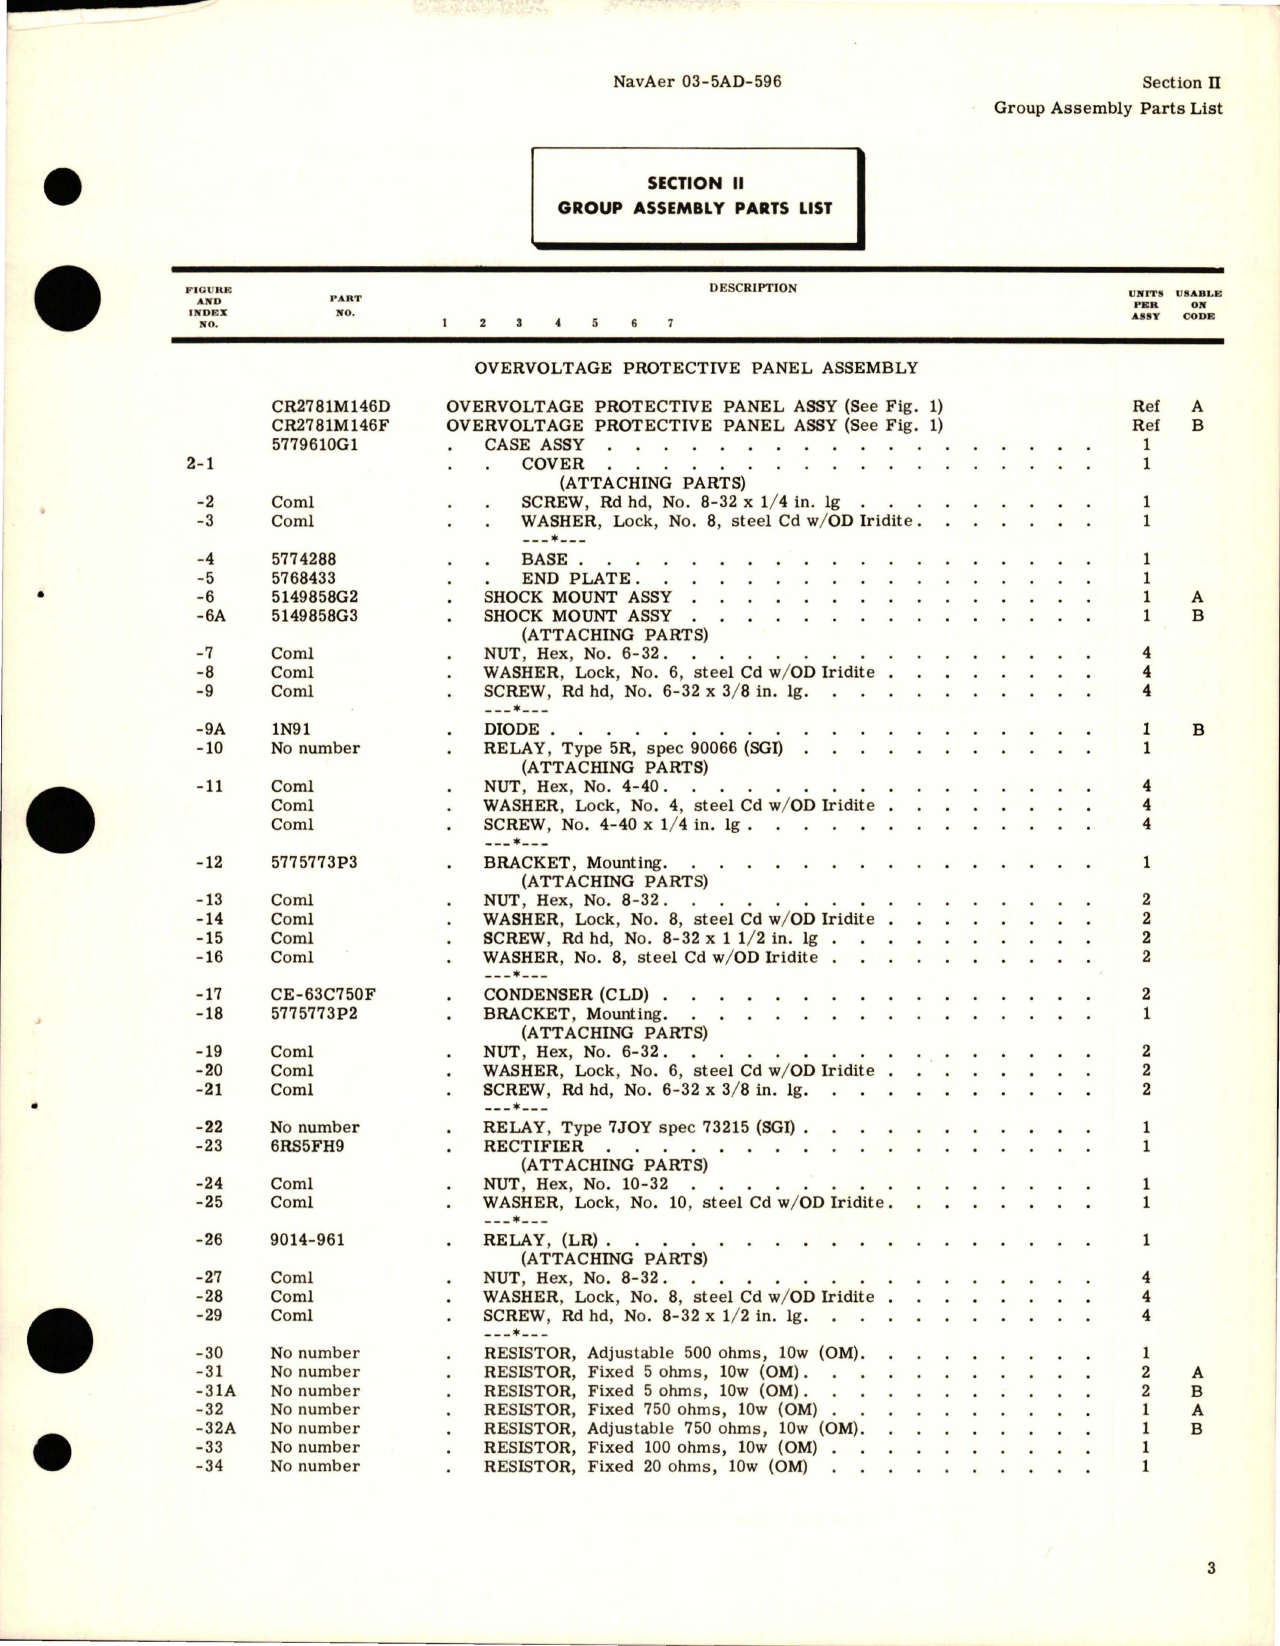 Sample page 5 from AirCorps Library document: Illustrated Parts Breakdown for Overvoltage Protective Panel for DC Generator - Models CR2781M146D and CR2781M146F